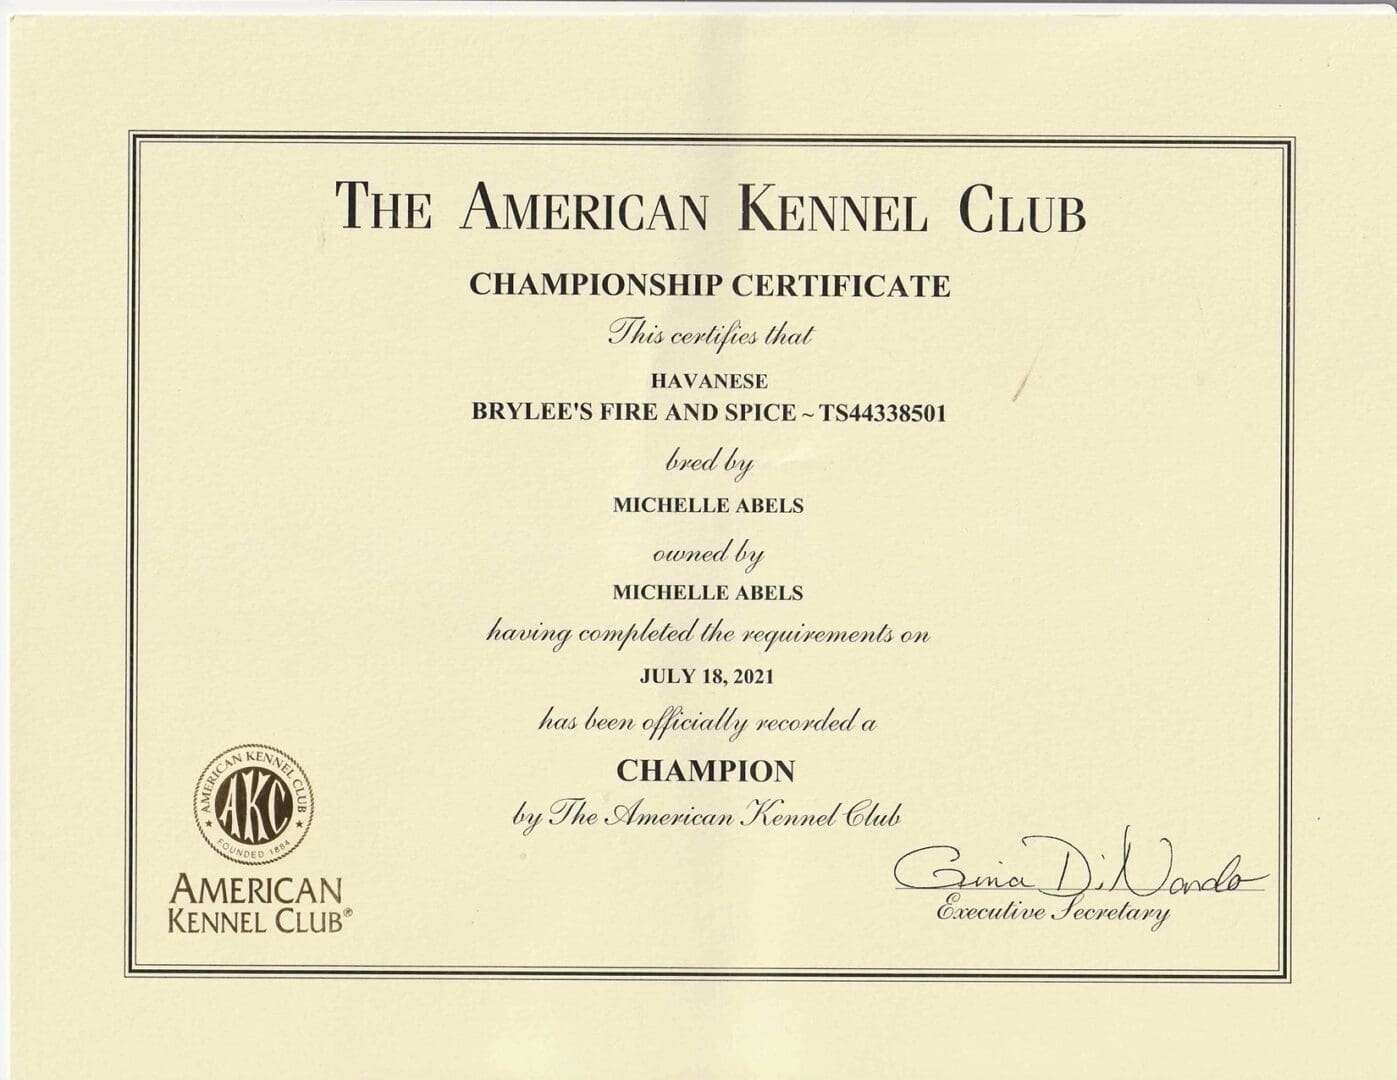 Brylee's Angels Havanese presents the prestigious American Kennel Club Championship Certificate for our AKC champions. Our Havanese show dogs, bred with love in Illinois, possess exceptional lineage and